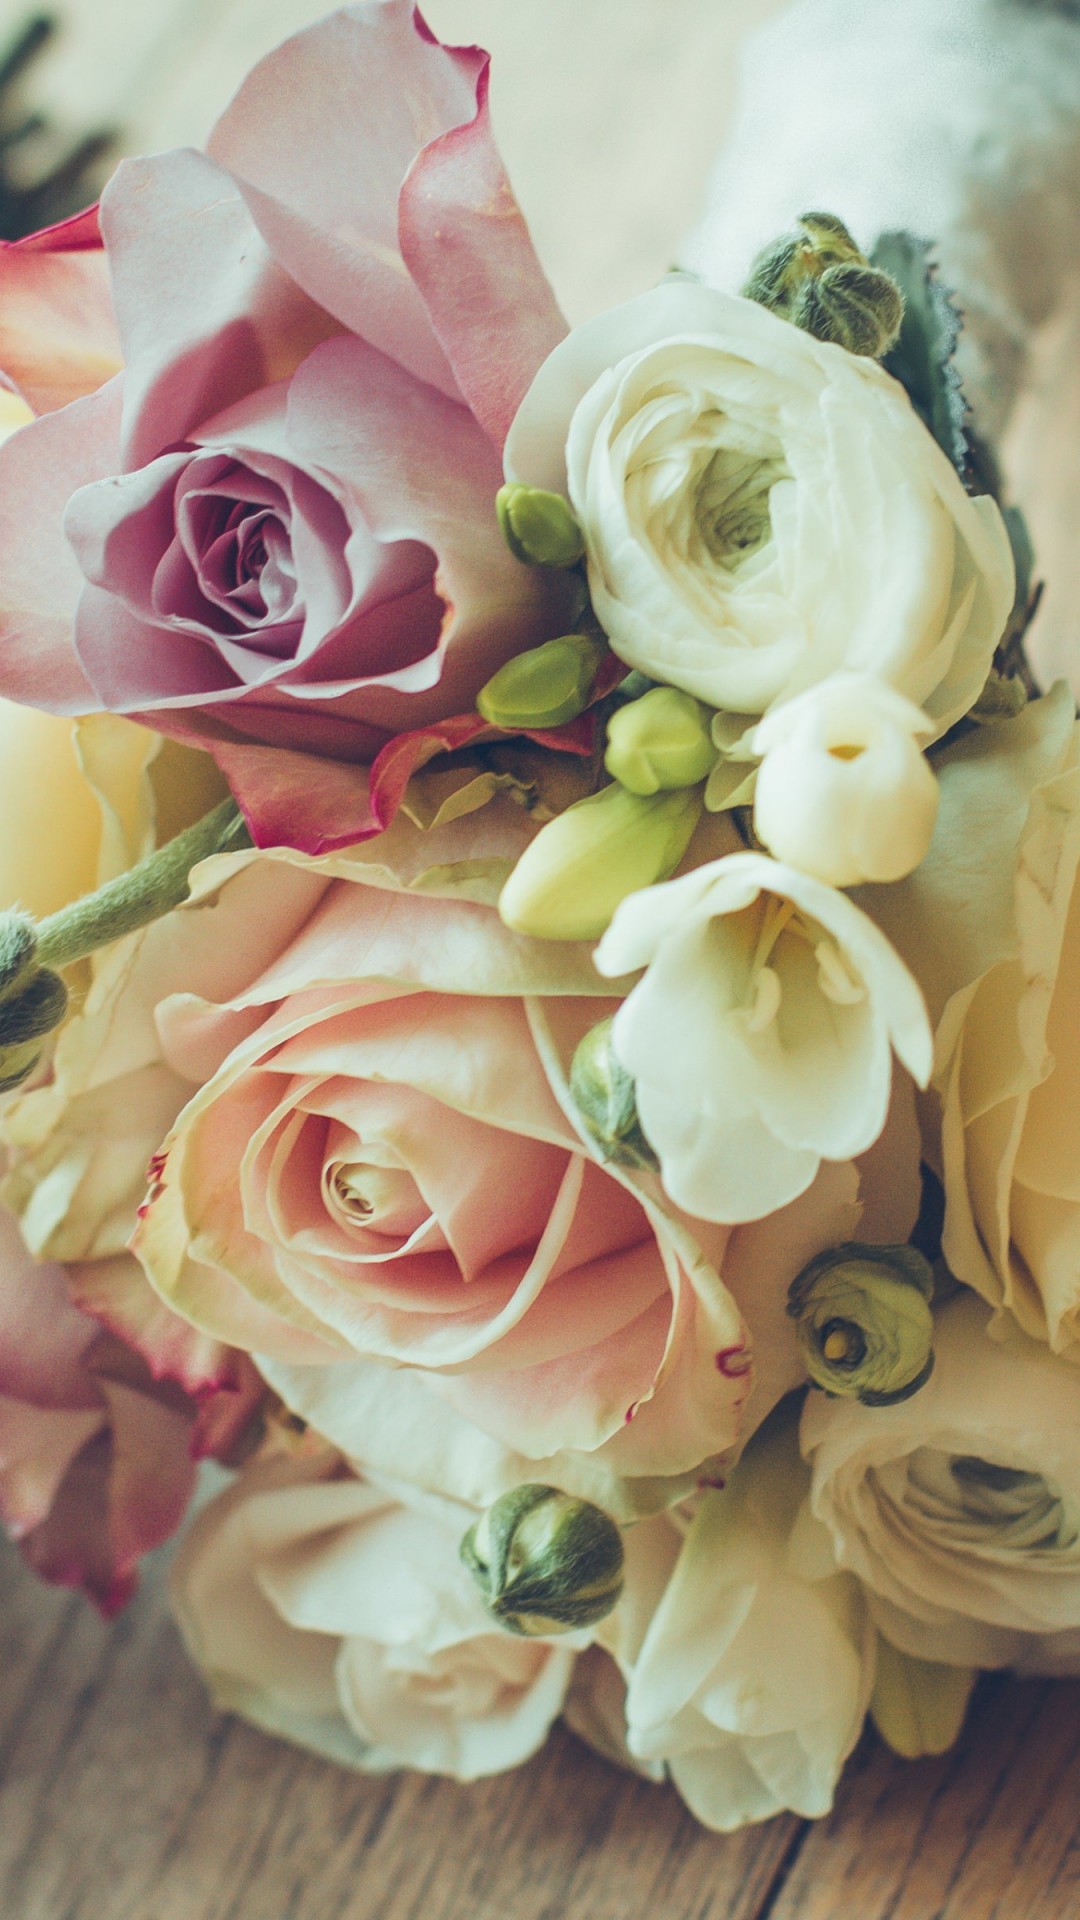 Roses Bouquet Composition Wallpaper for SONY Xperia Z3